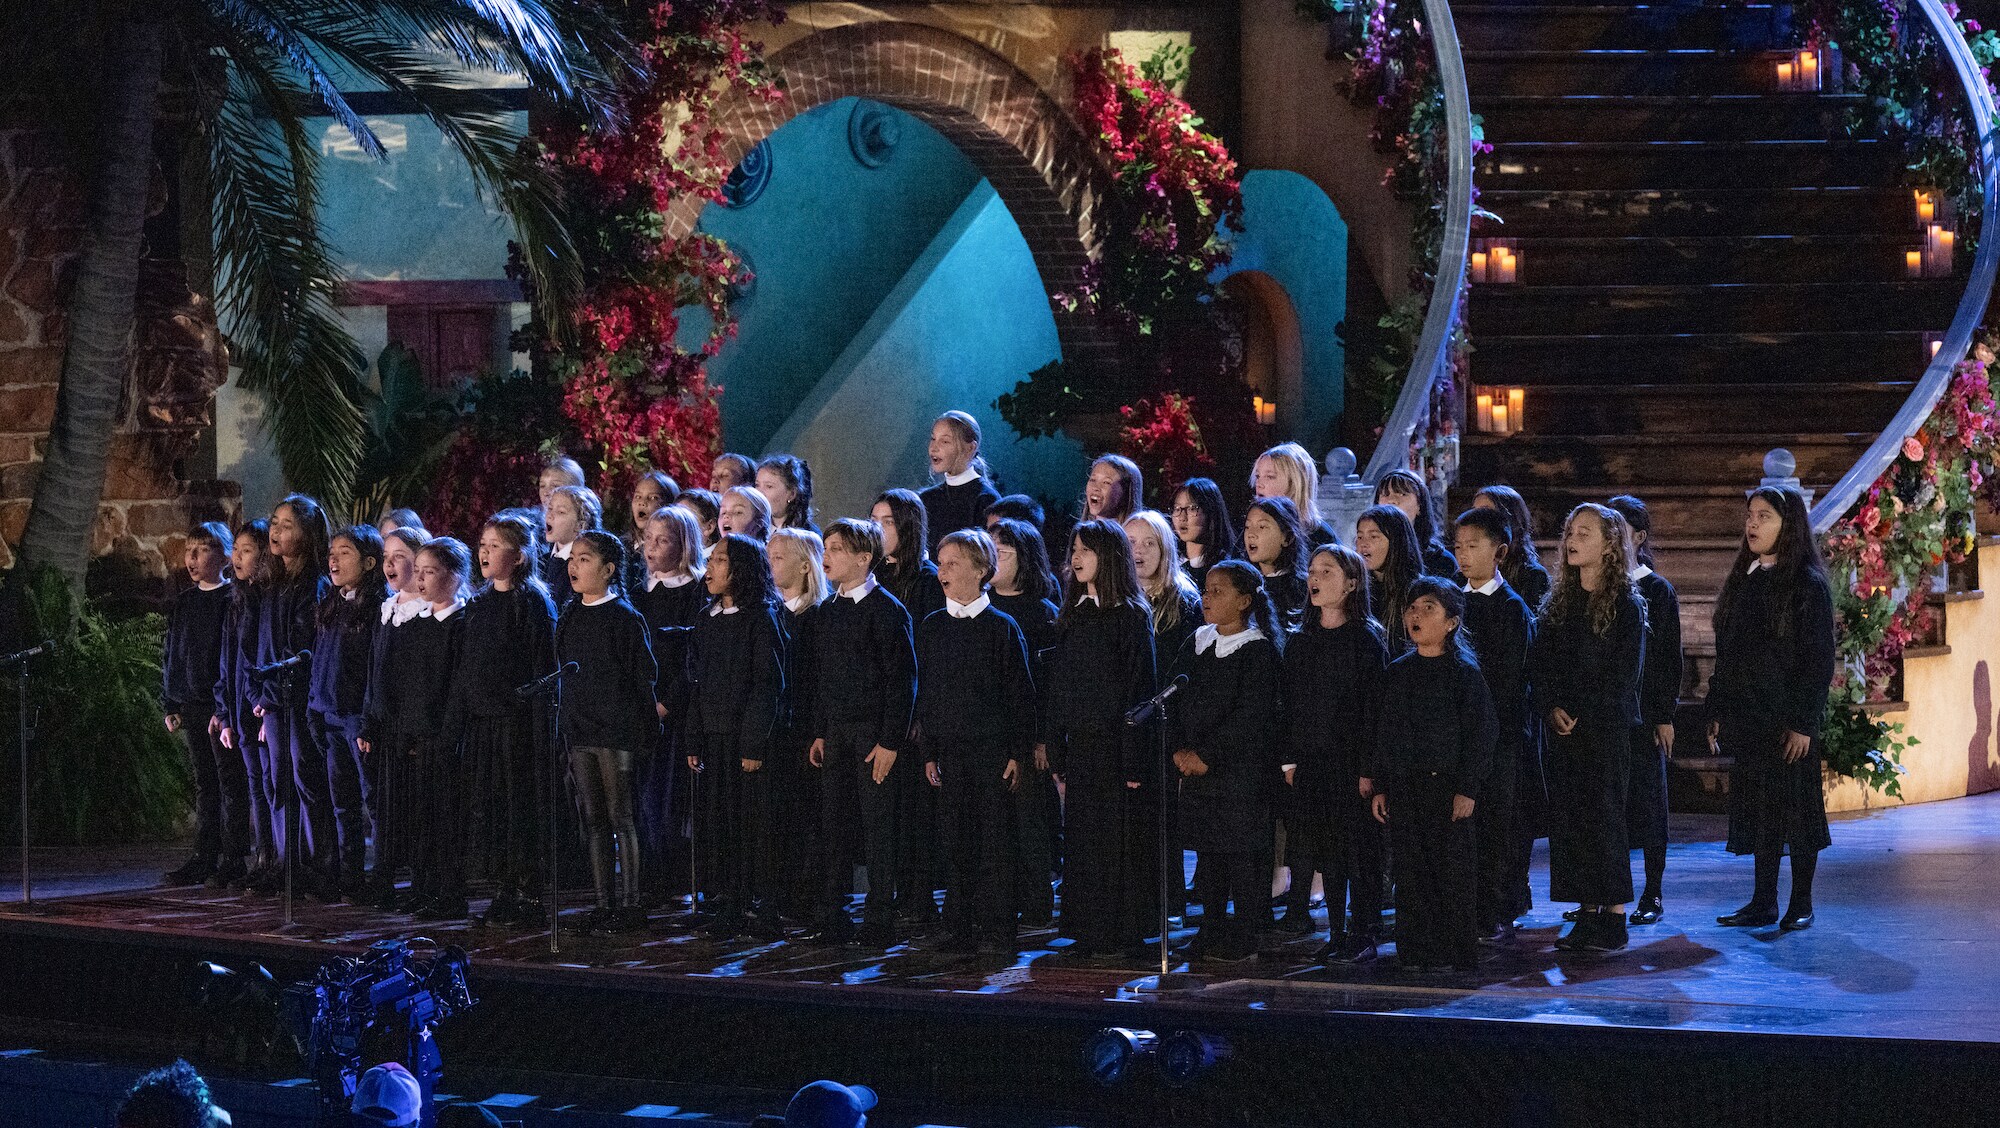 The Elemental Choir performs during the live-to-film concert experience Encanto at the Hollywood Bowl. Encanto at the Hollywood Bowl, from Disney Branded Television, will premiere on Dec. 28 only on Disney+. (Photo credit: Disney/Temma Hankin)